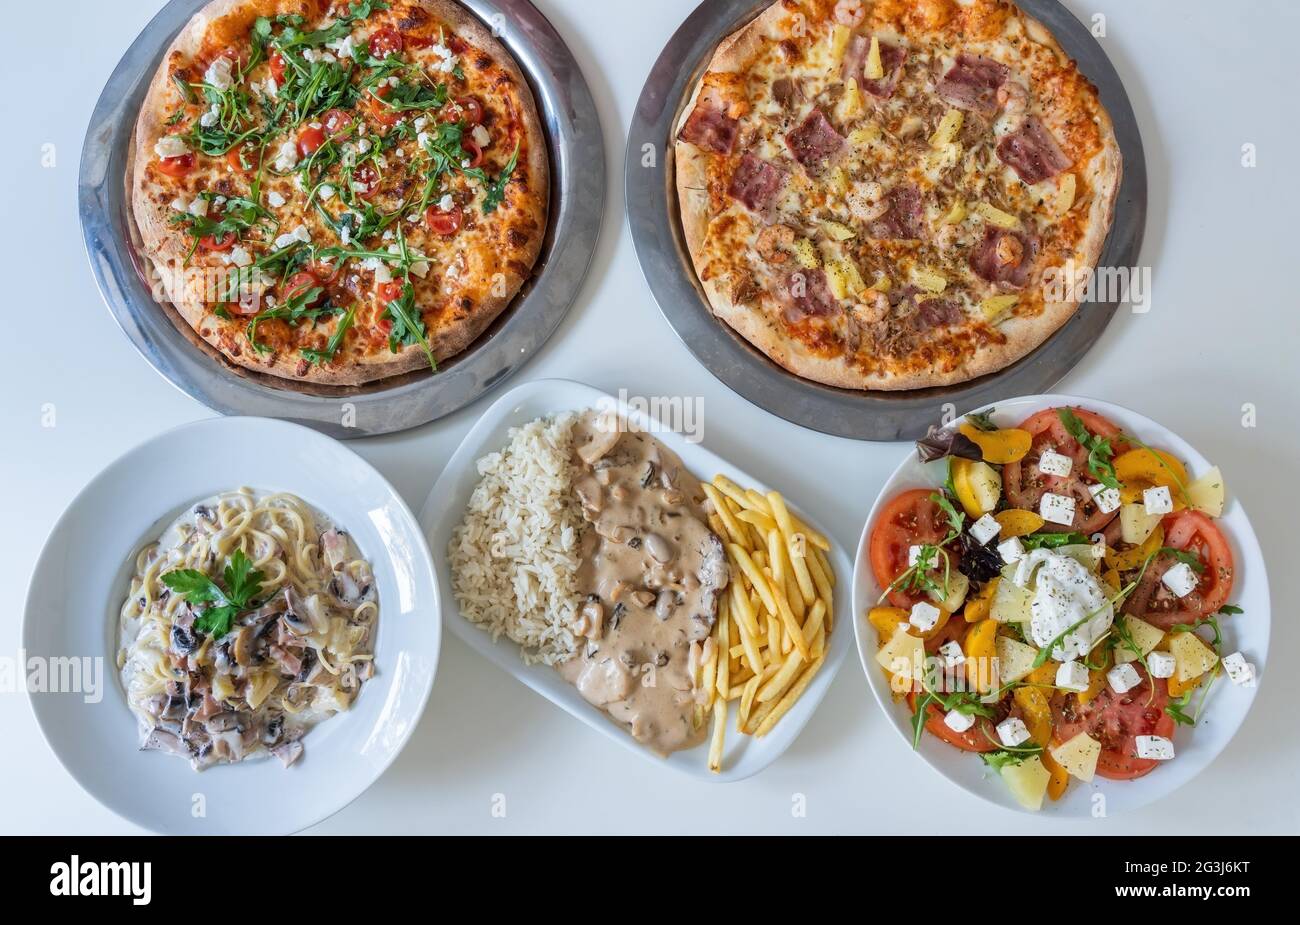 Variety of different cultural dishes in table of Indian food plates Pizza,salad, rice, meat, vegetables. Food panorama. Top view Stock Photo